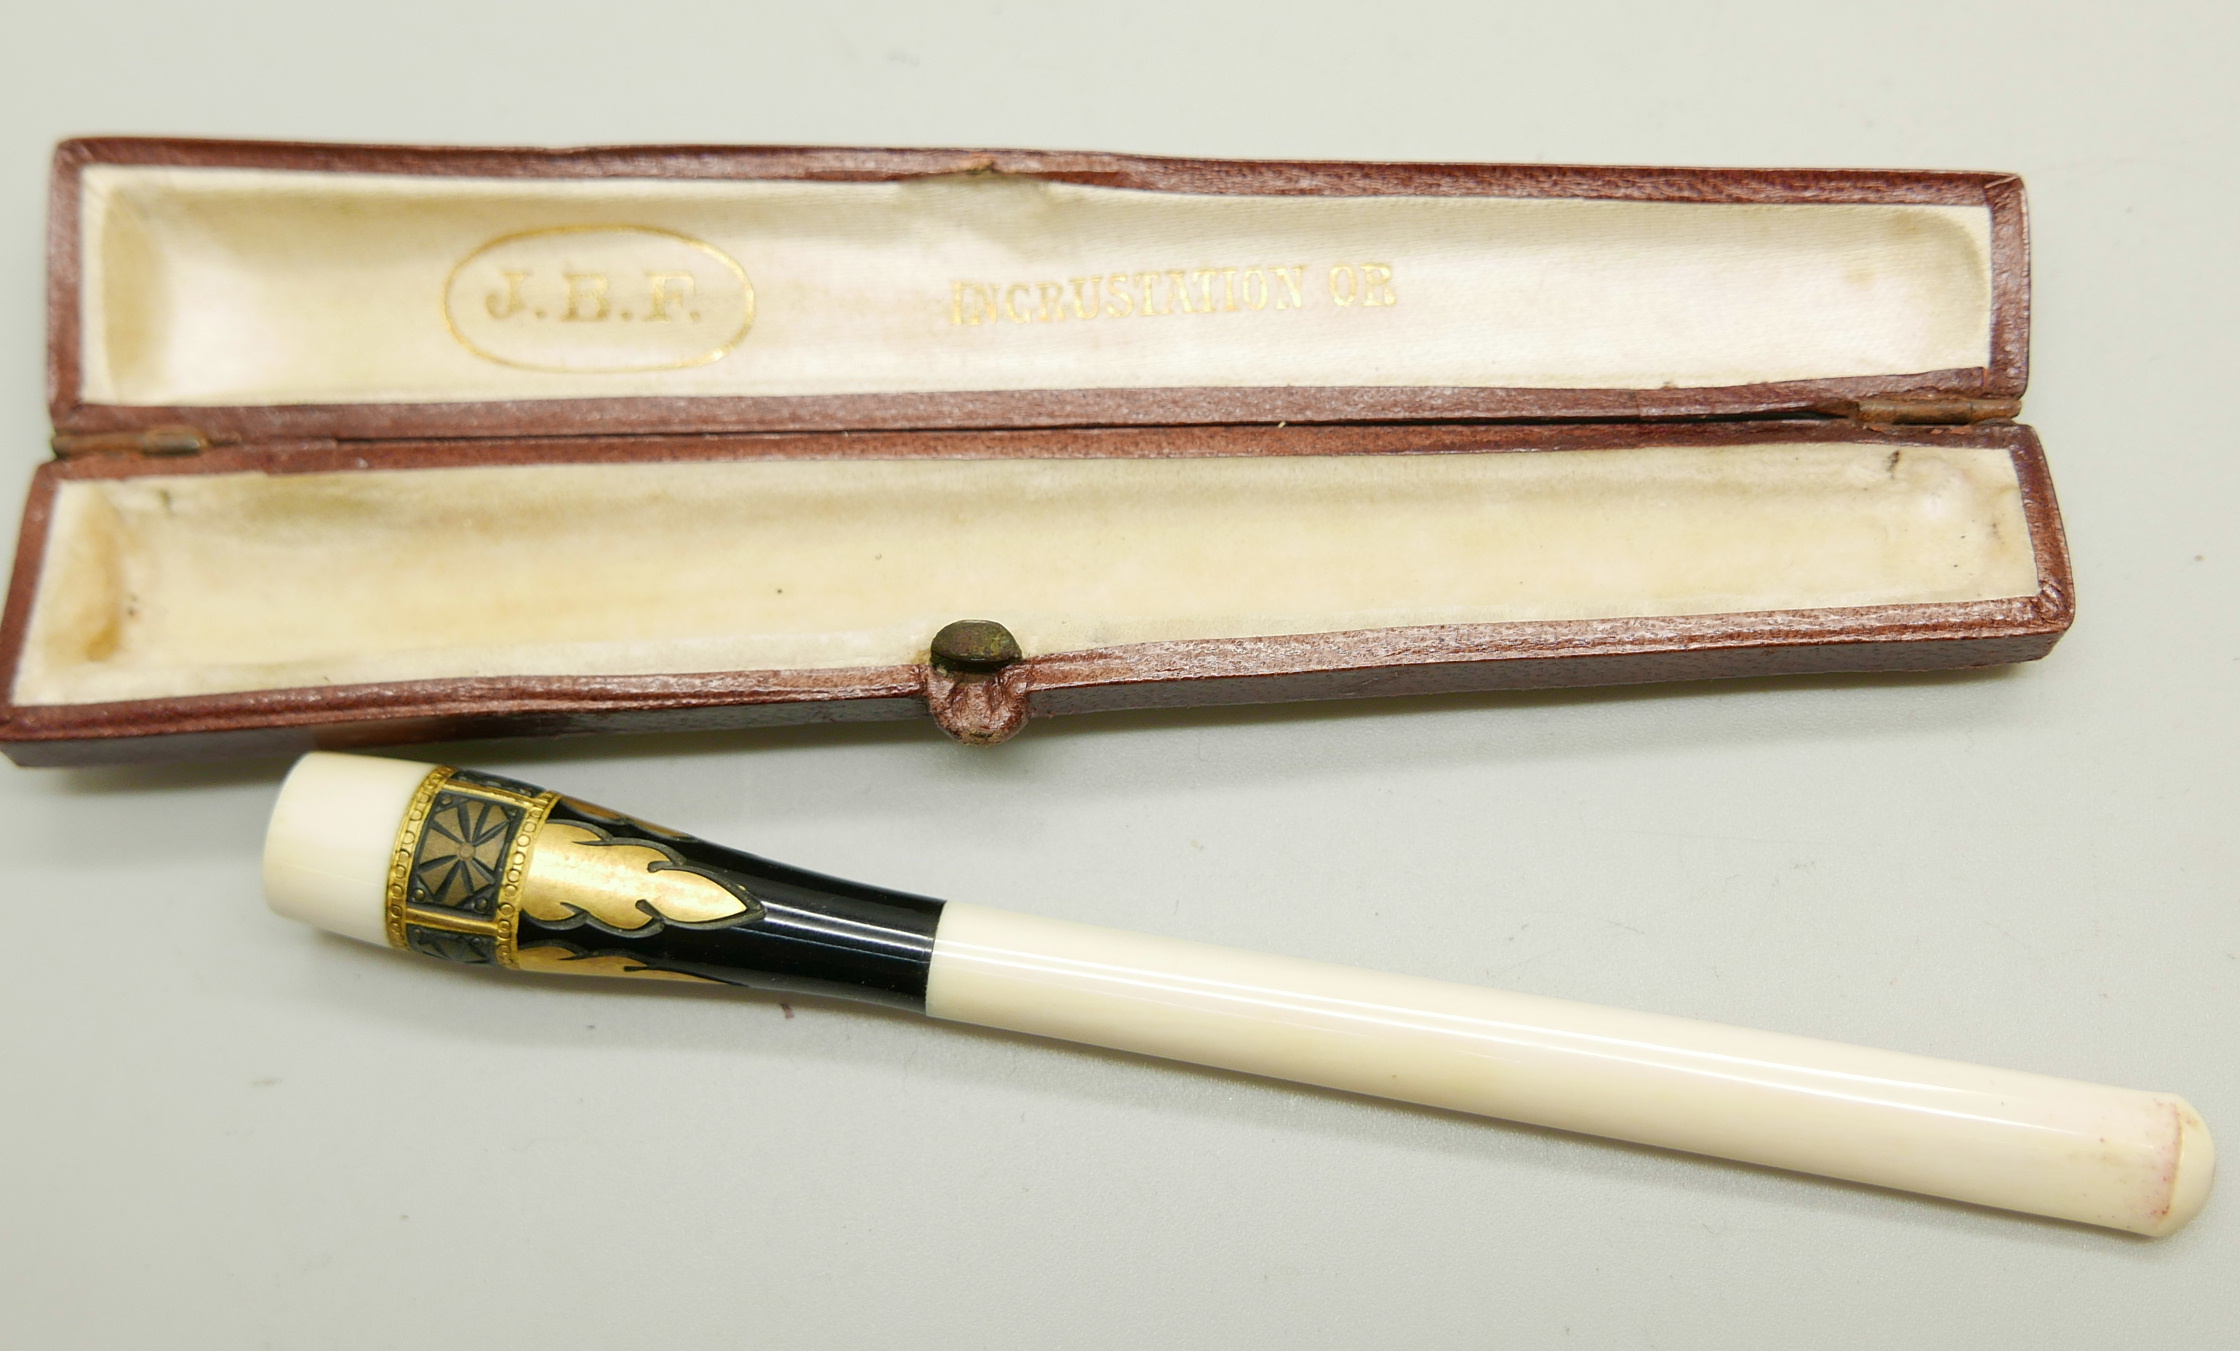 A smoker's pipe with a 9ct gold collar and a cigarette holder, both cased - Image 5 of 6